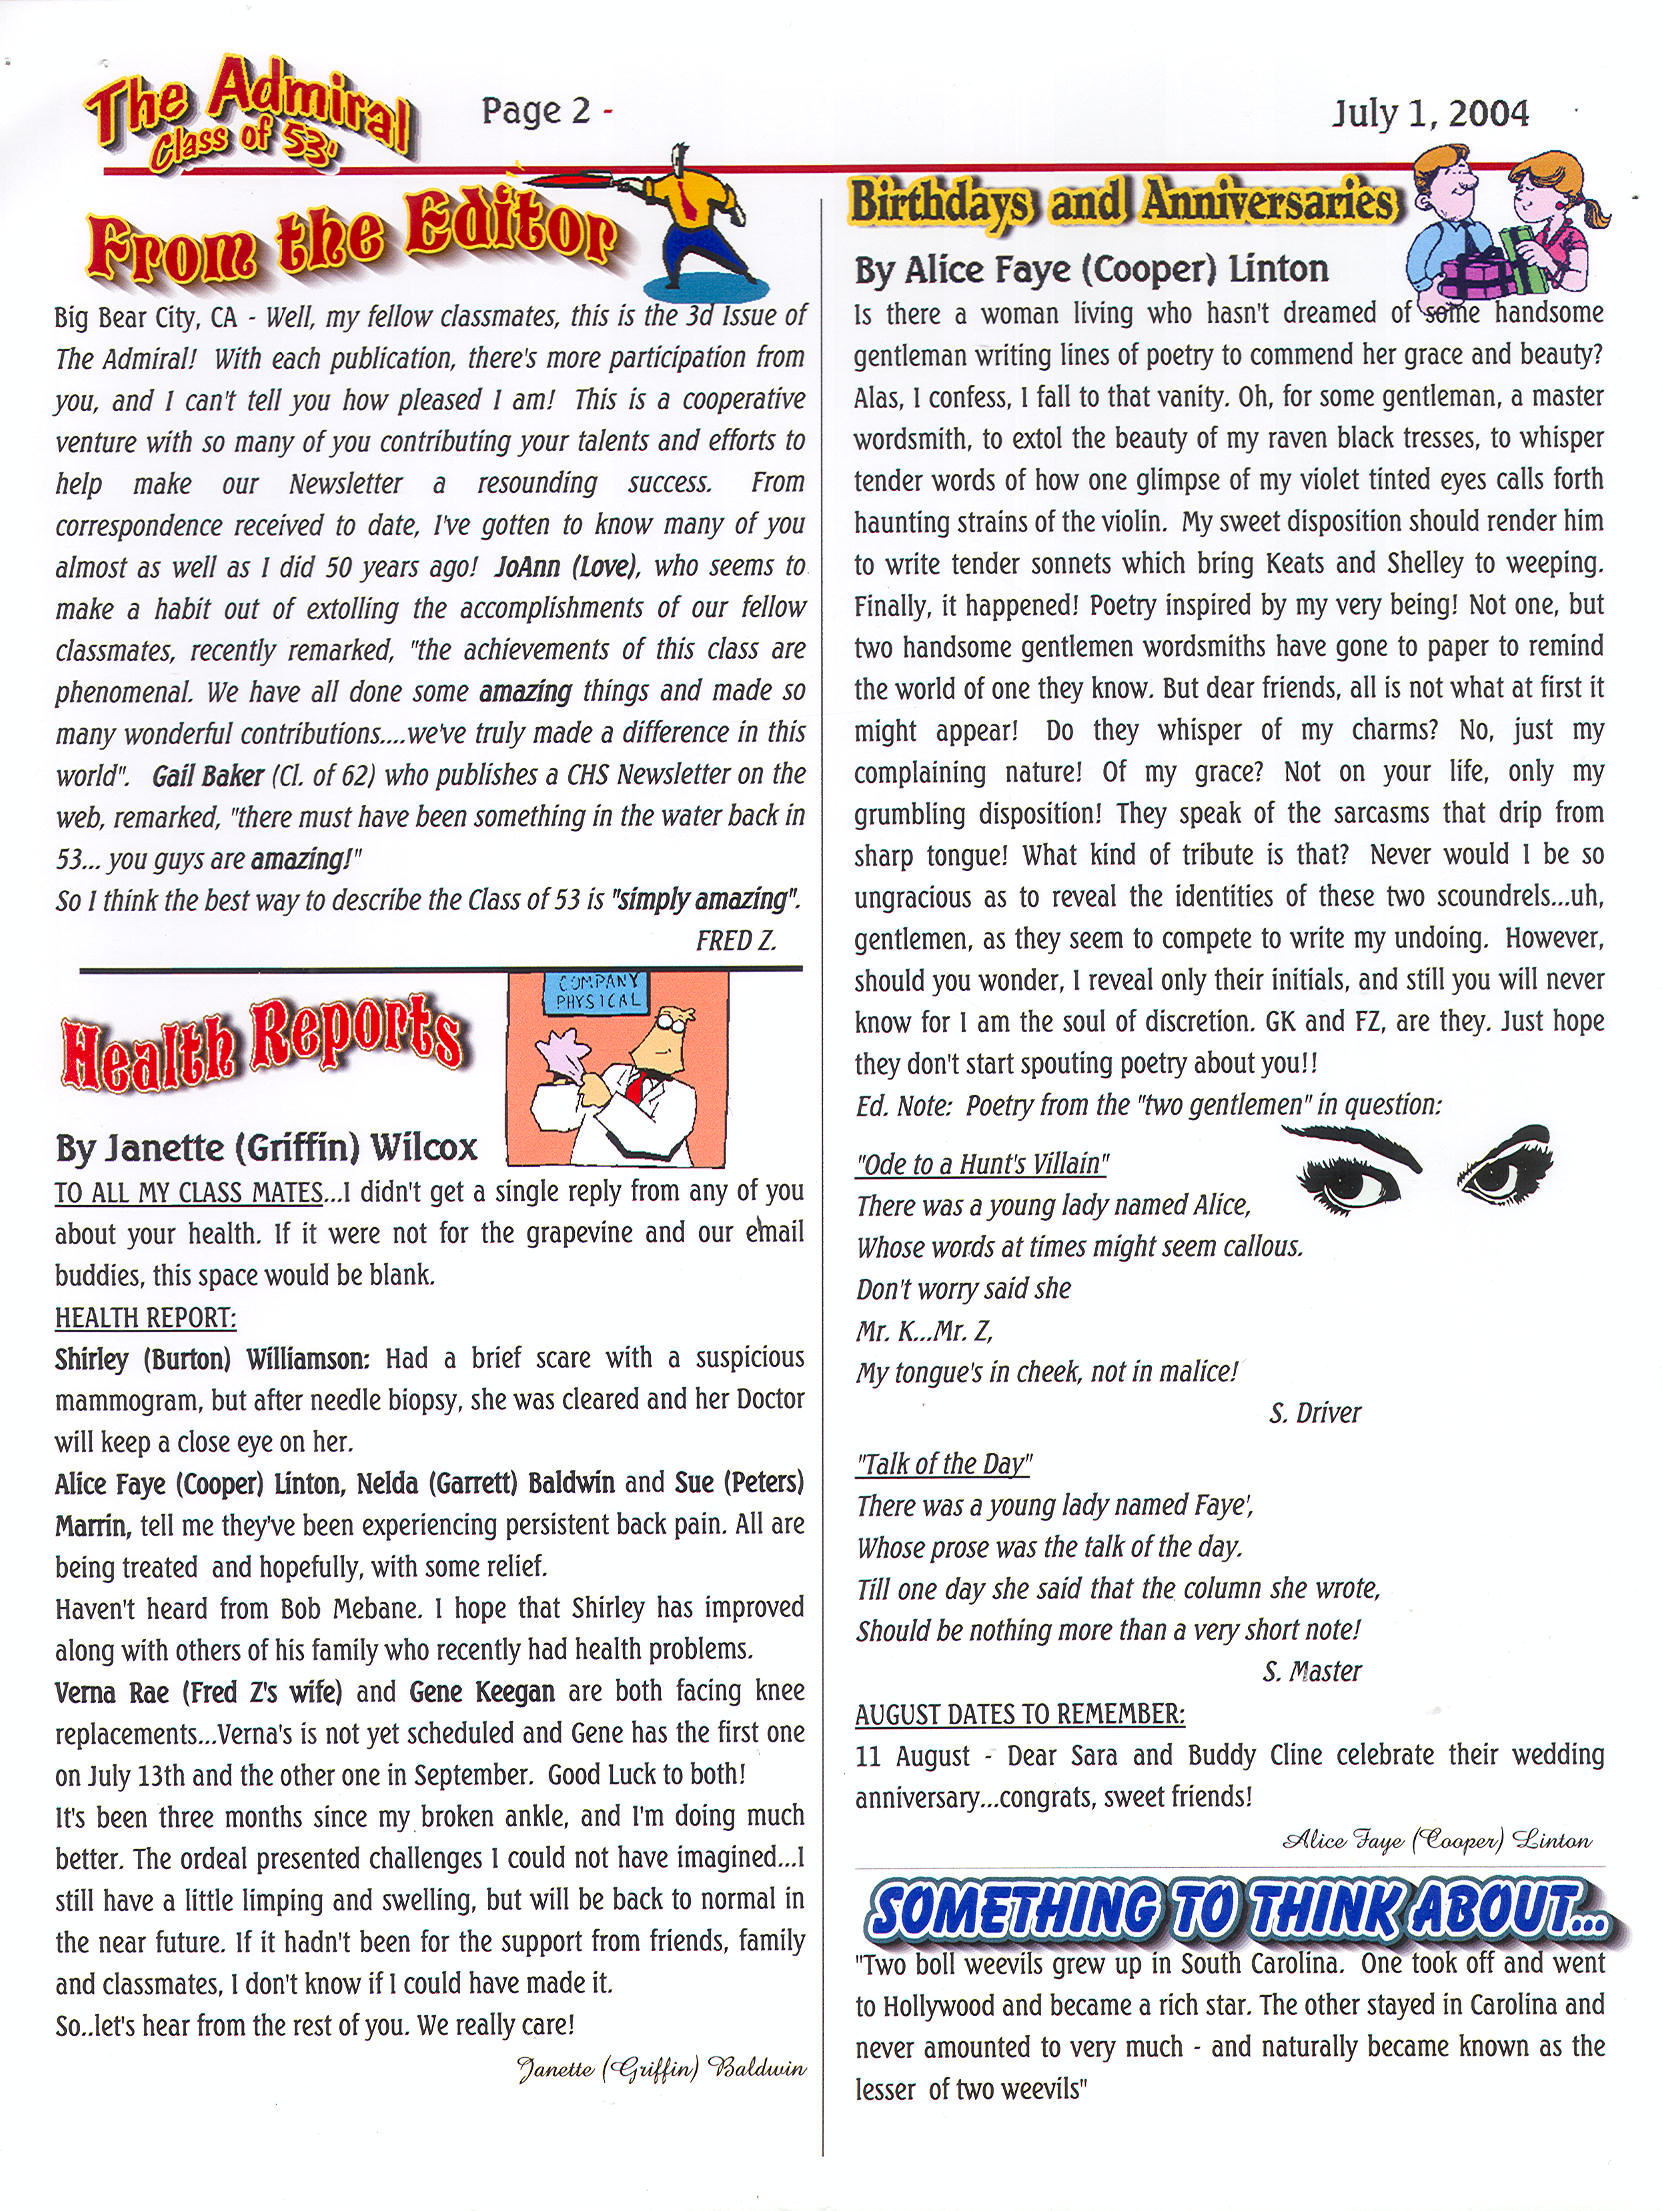 The Admiral - July 2004 - pg. 2